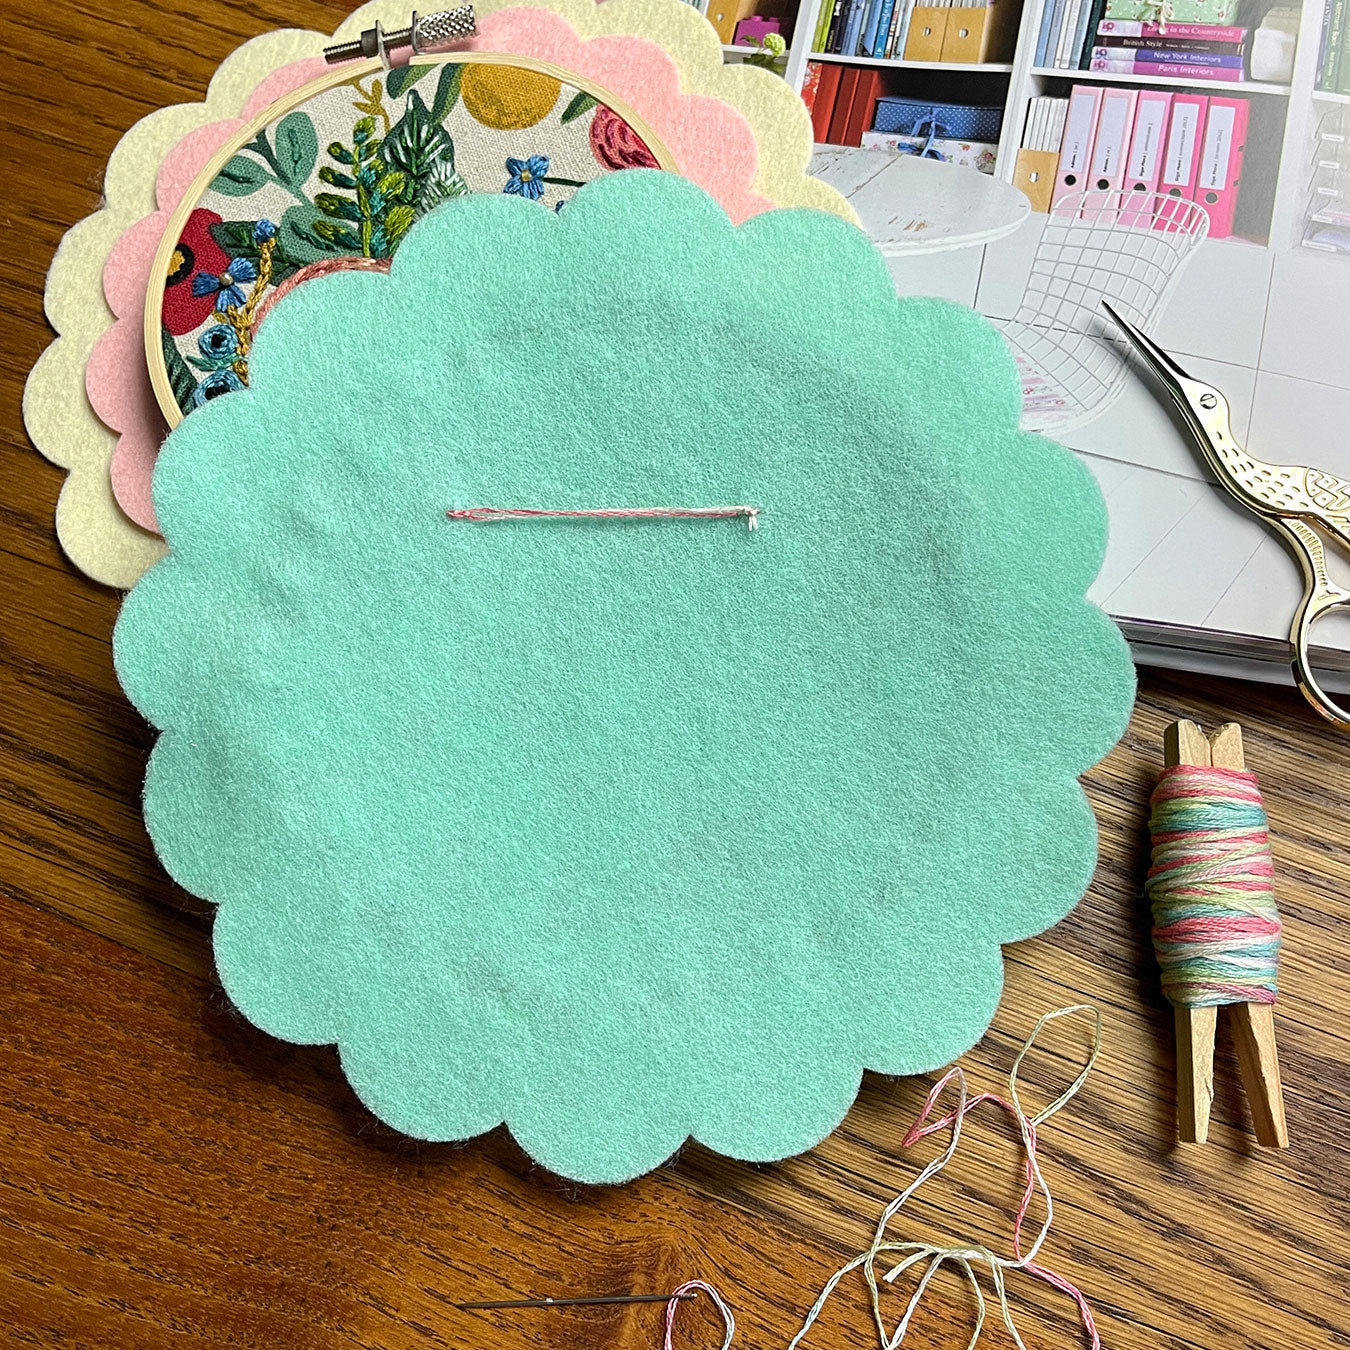 The back of an embroidery hoop with a scalloped felt circle as the backing. There is a line of handsewn embroidery thread near the top of the hoop backing to act as a hook.